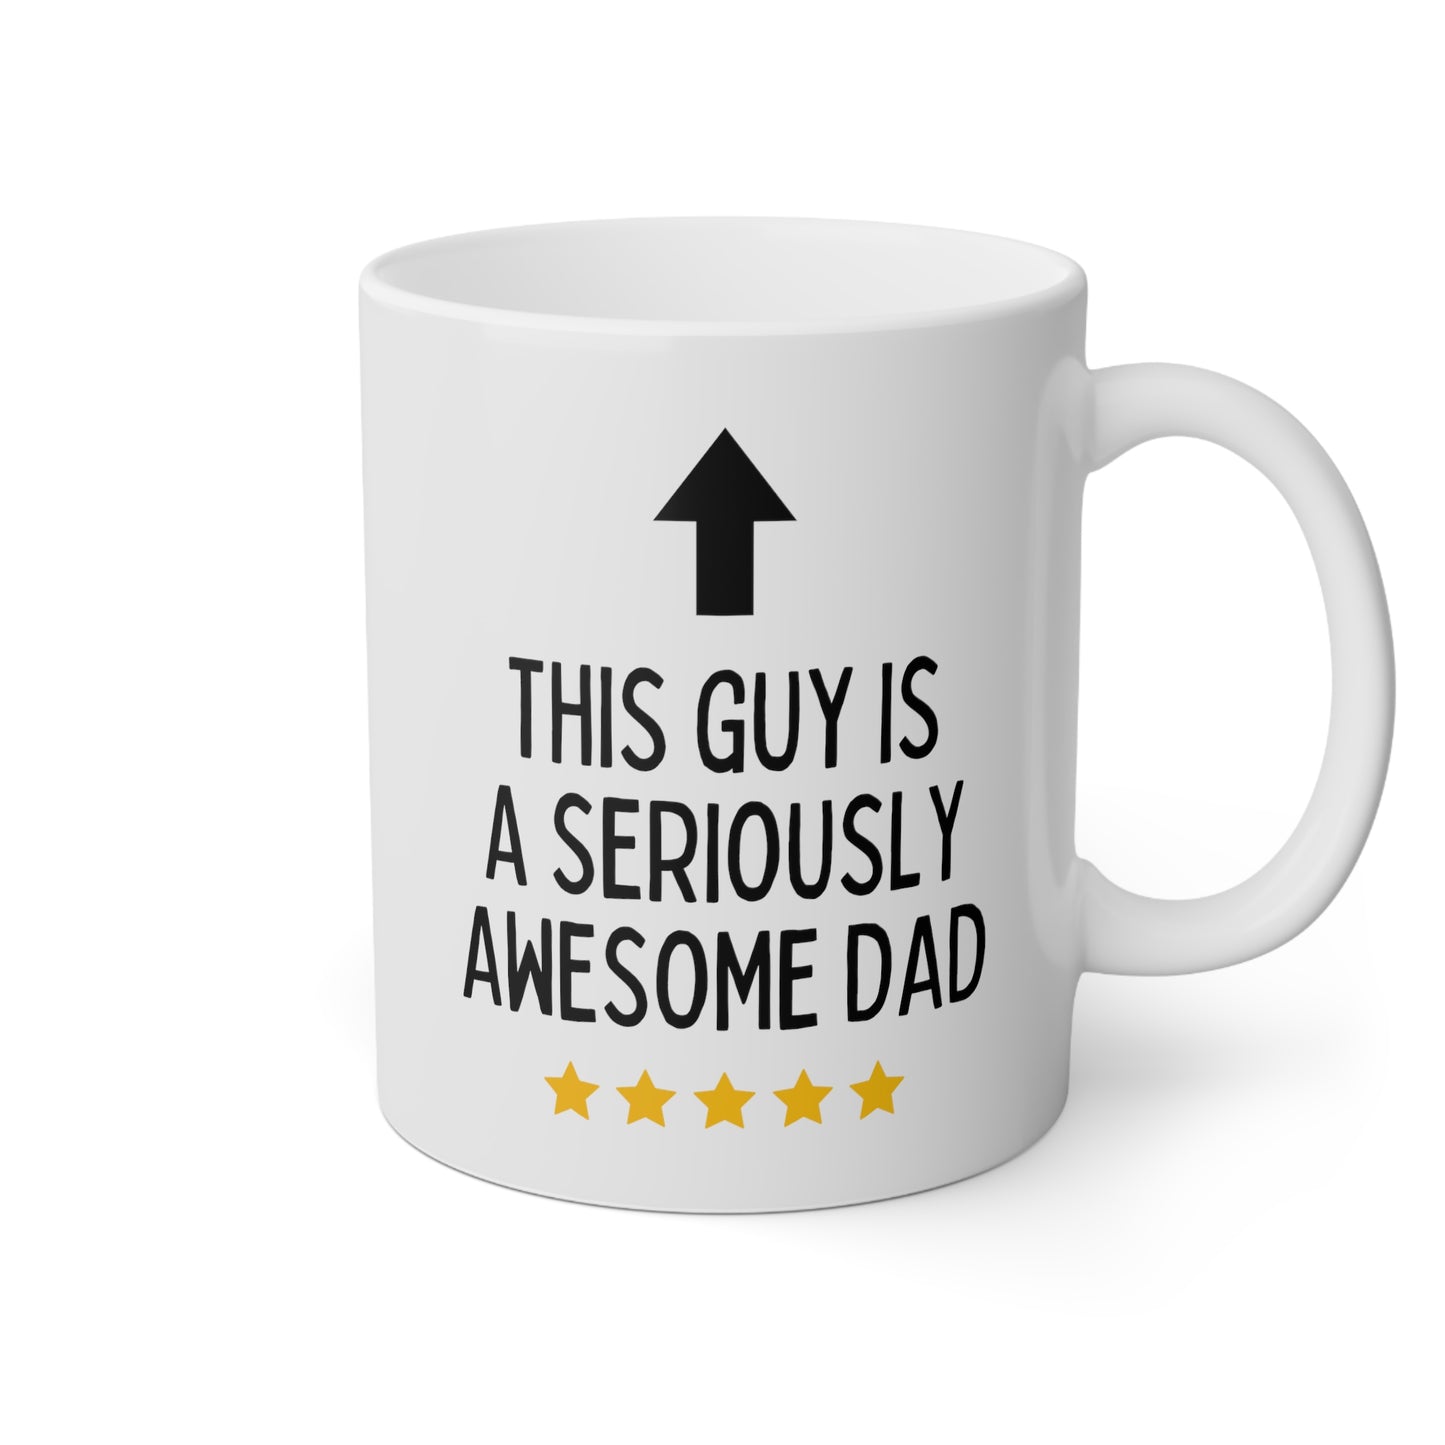 This Guy Is One Awesome Dad 11oz white funny large coffee mug gift for best papa father father's day grandfather waveywares wavey wares wavywares wavy wares